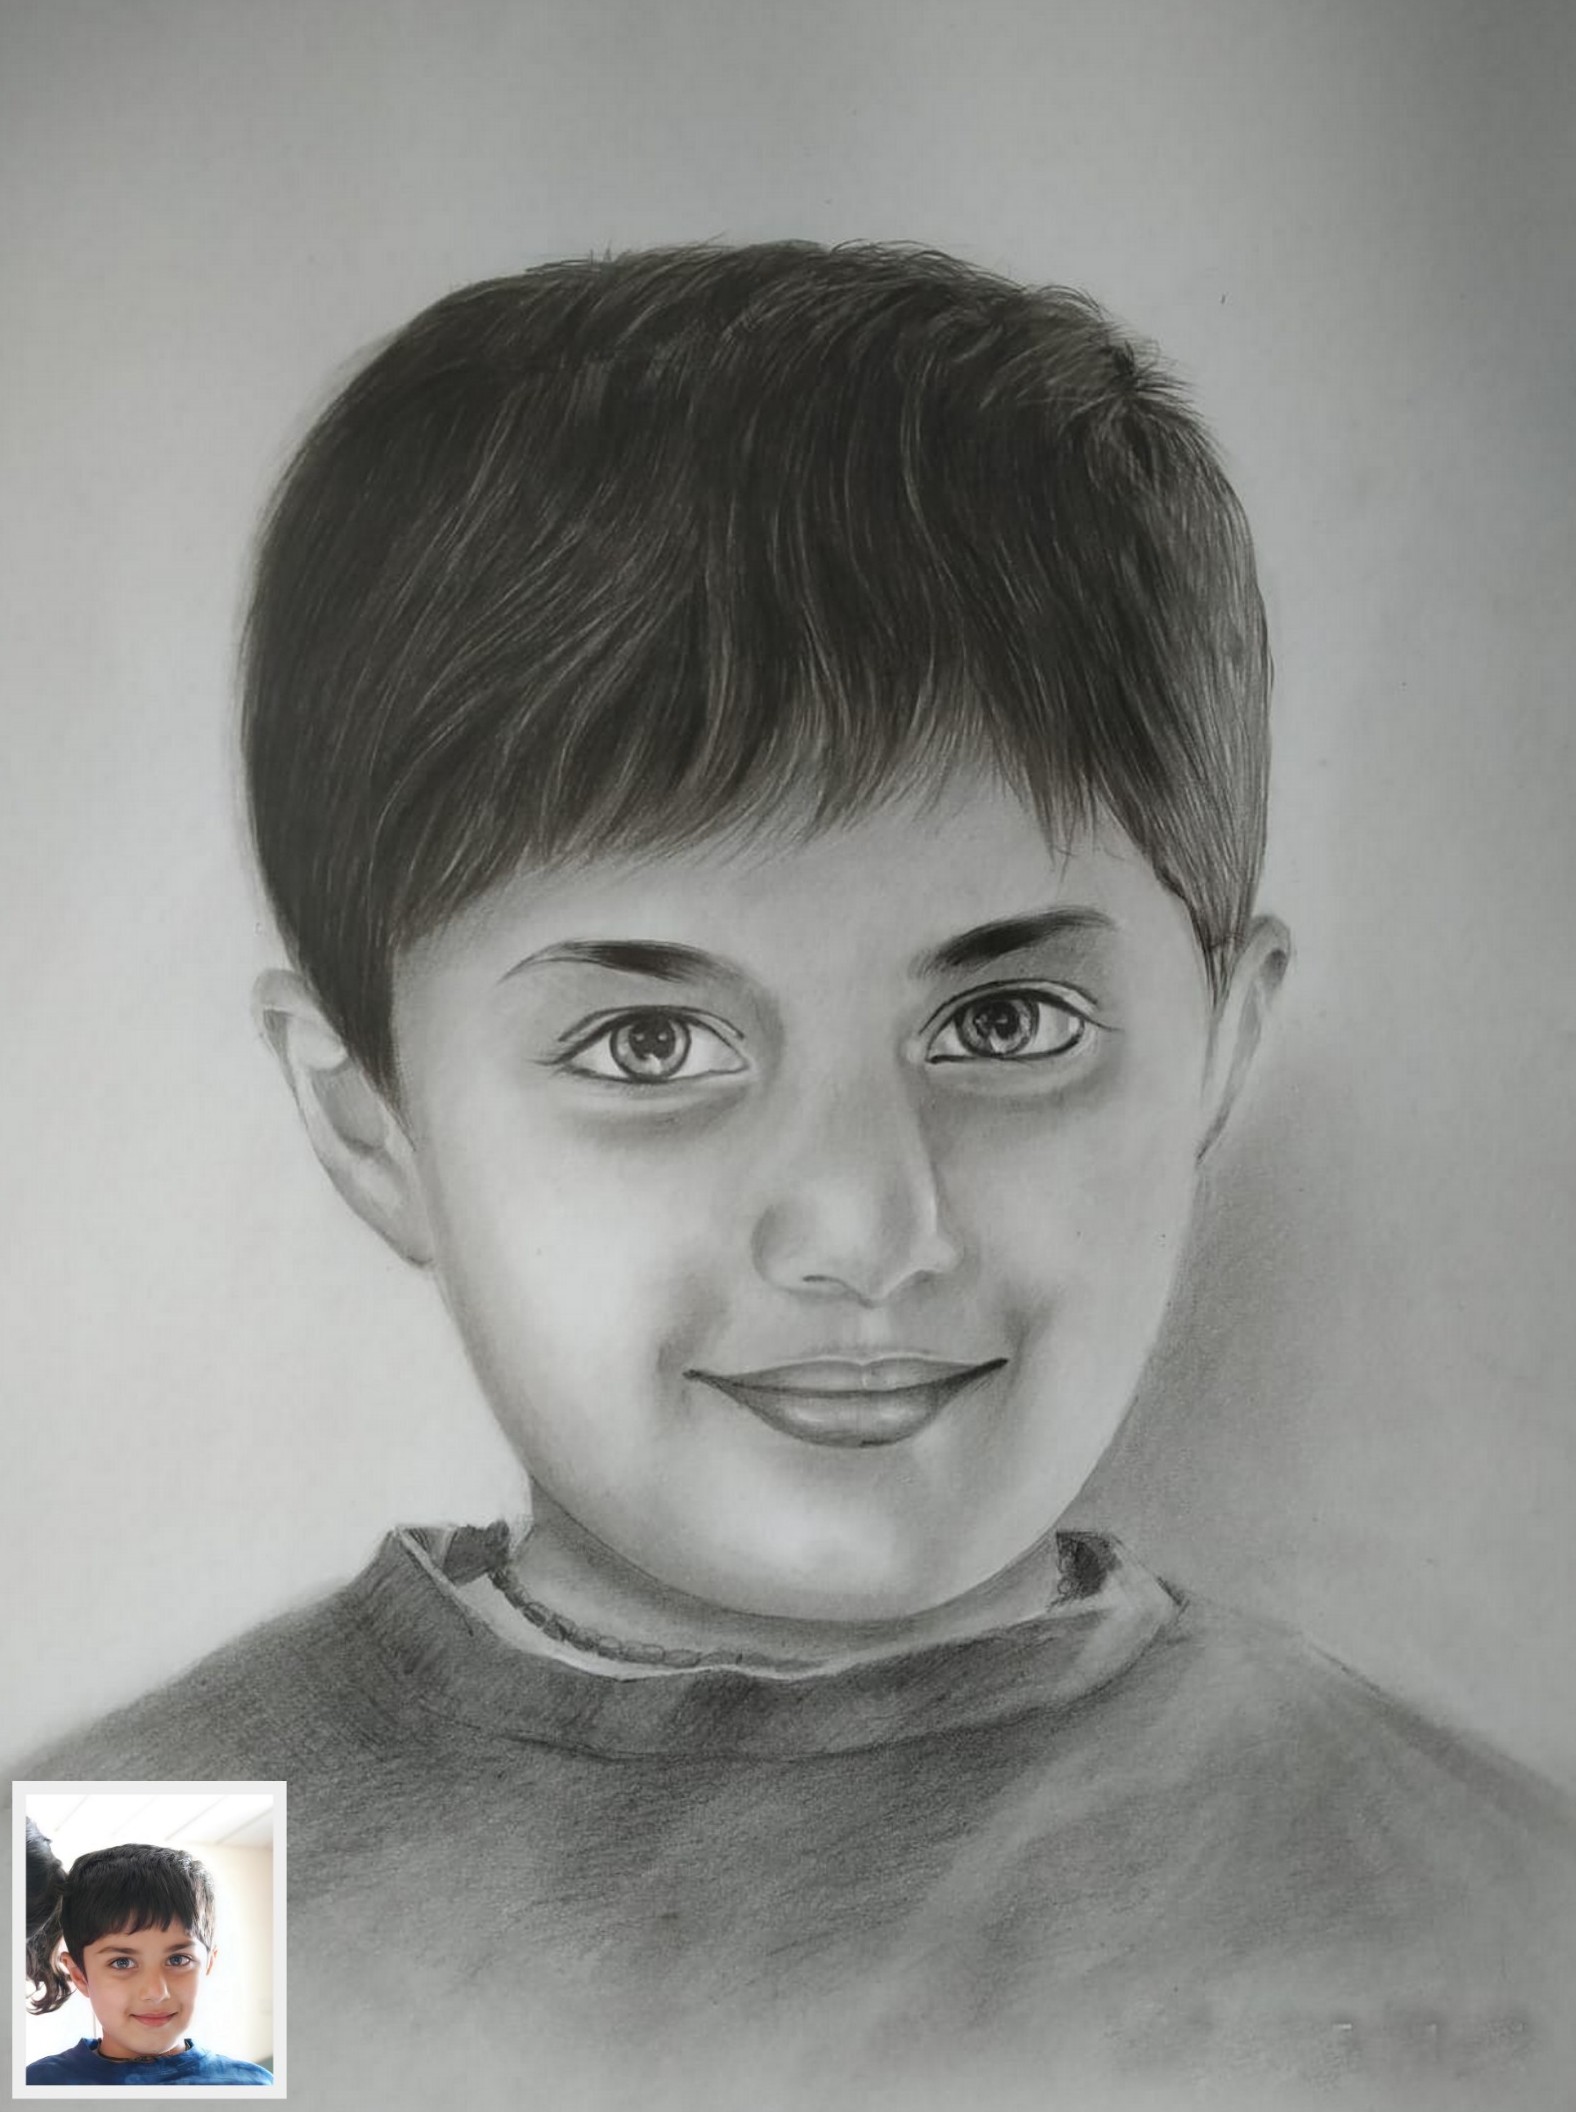 charcoal for drawing young boy, portrait sketch from photo, drawing with charcoal pencils, sketch 